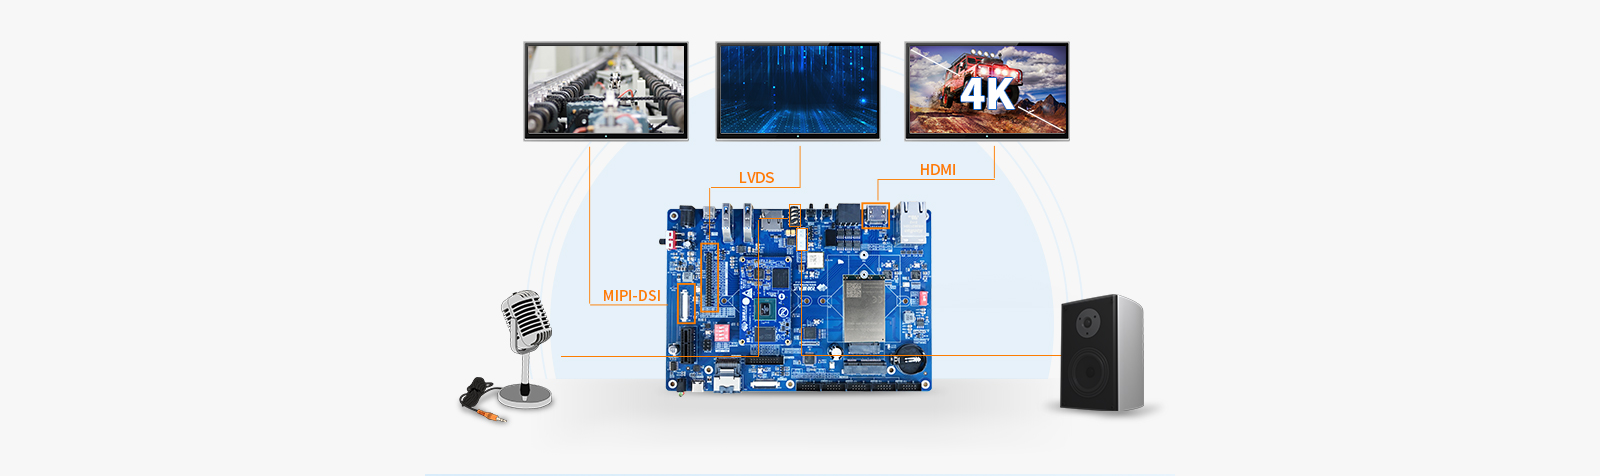 NXP iMX8M Plus system on module/single board computer 4K Picture Quality and HiFi Voice Experience